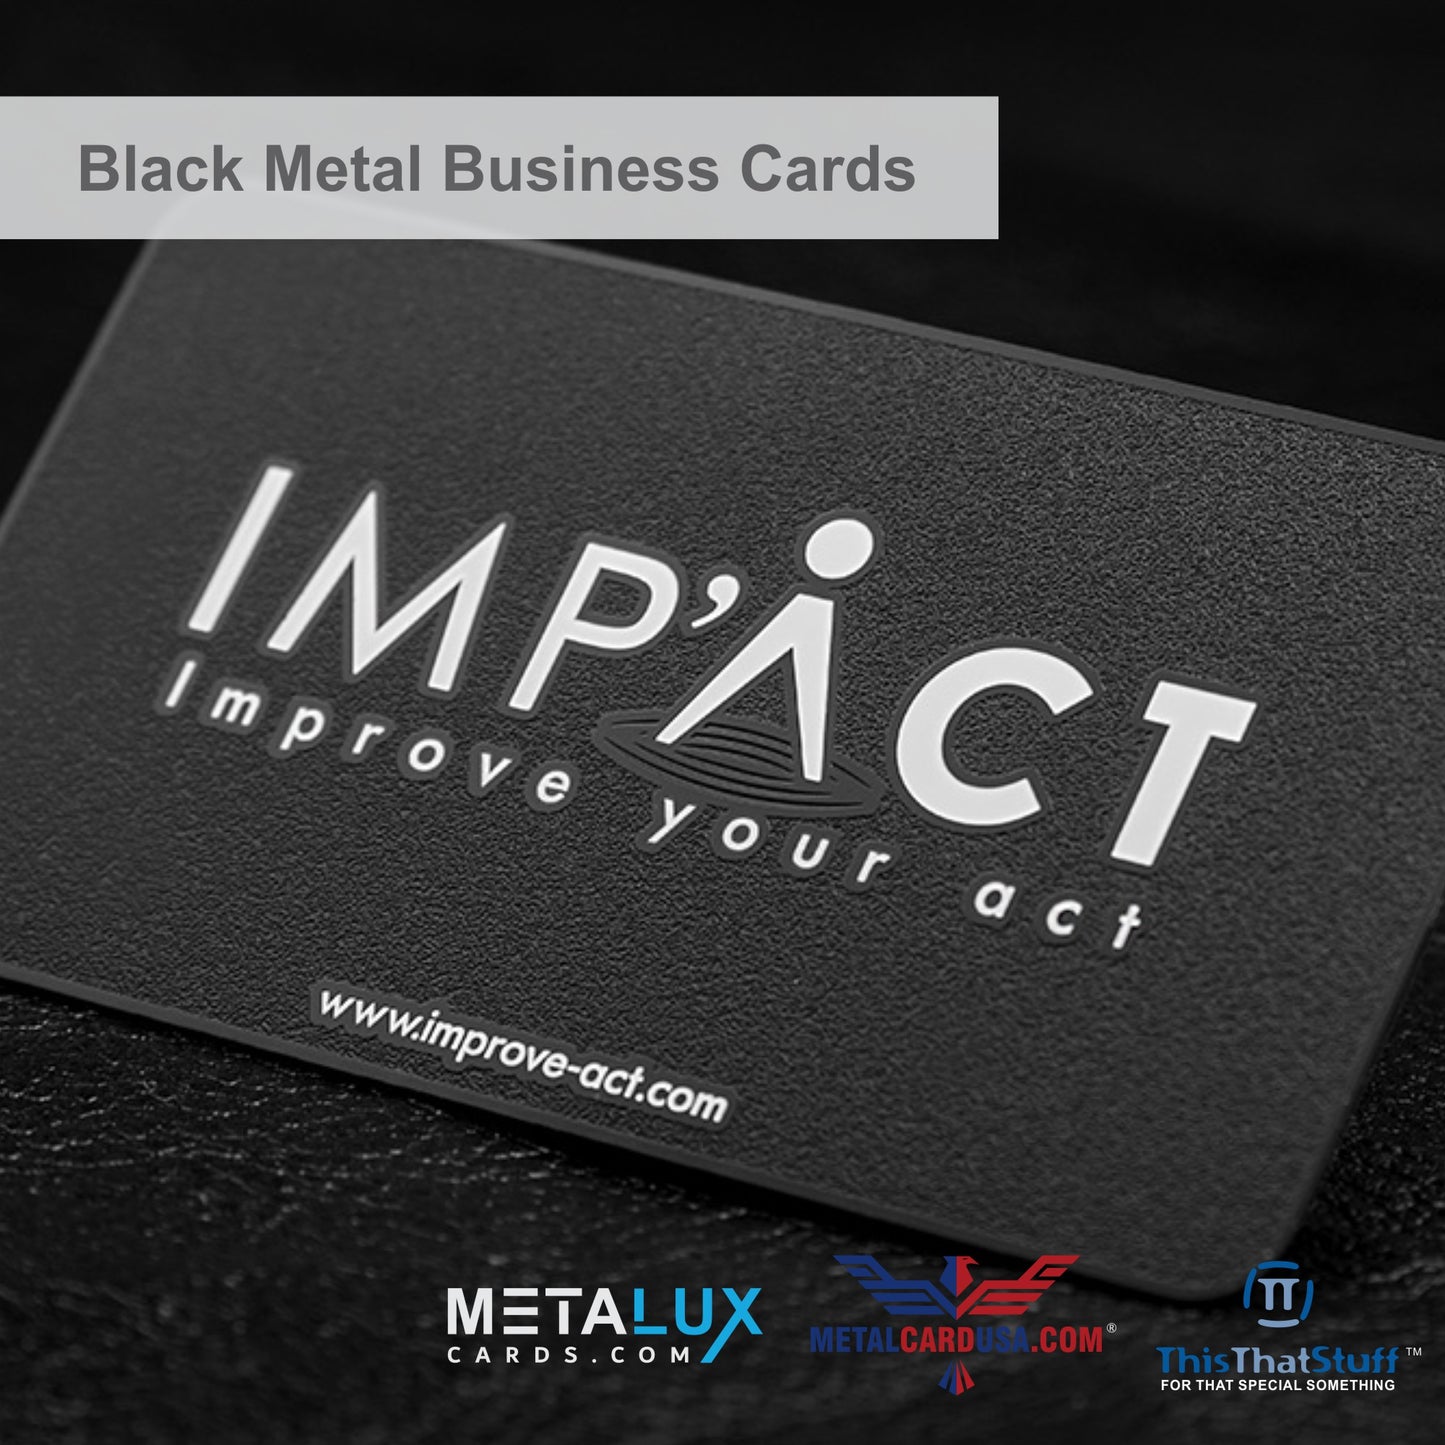 Metalux Black Metal Business Cards | Membership Cards | VIP Cards | Gift Cards | Special Events